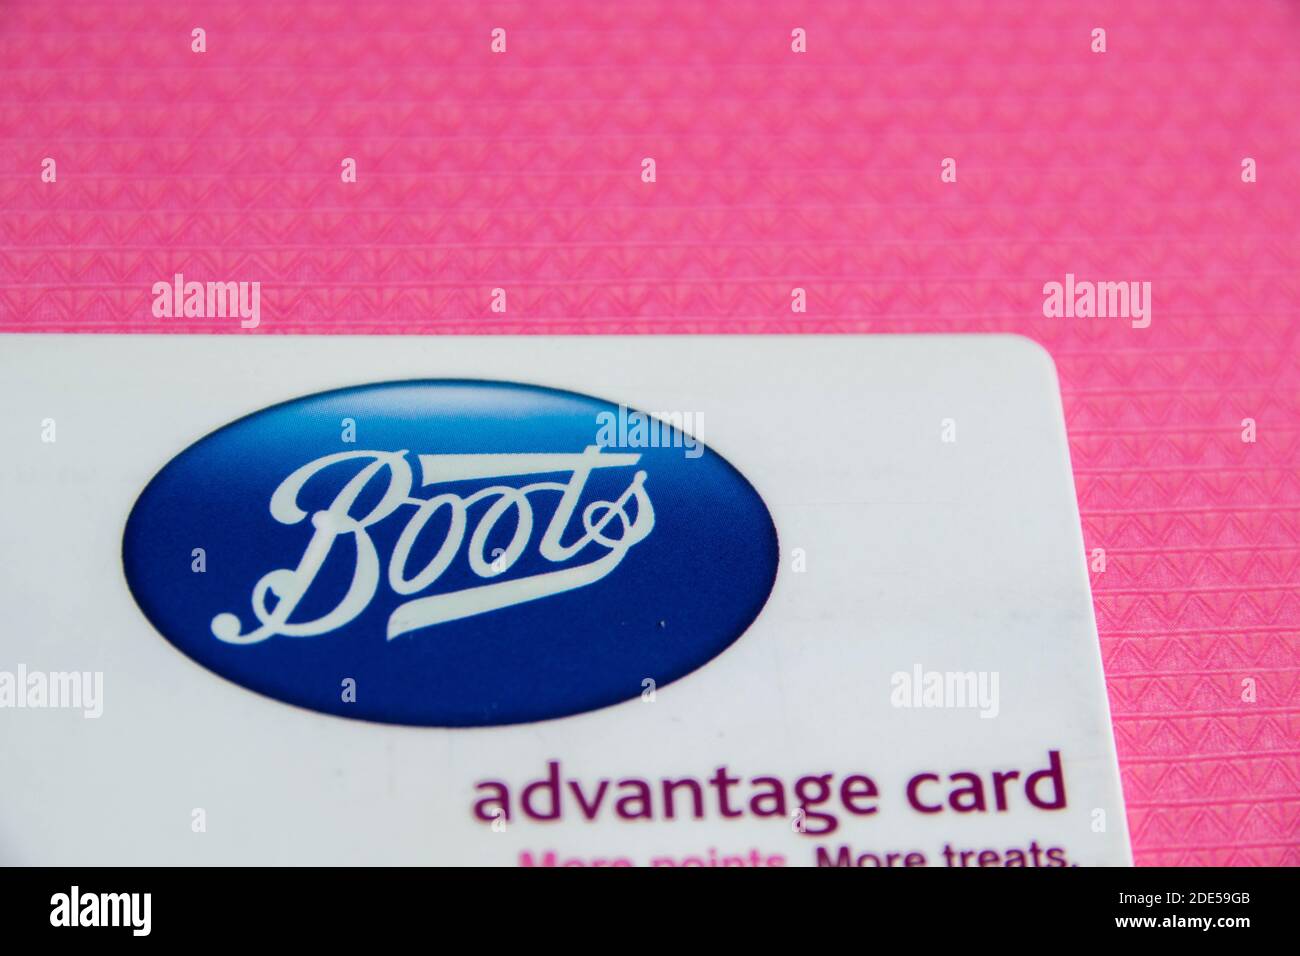 Durham, UK - 7 May 20: Boots advantage card on pattern background.  Customers collect points on purchases to spend in store. Loyalty card. UK  retailer Stock Photo - Alamy